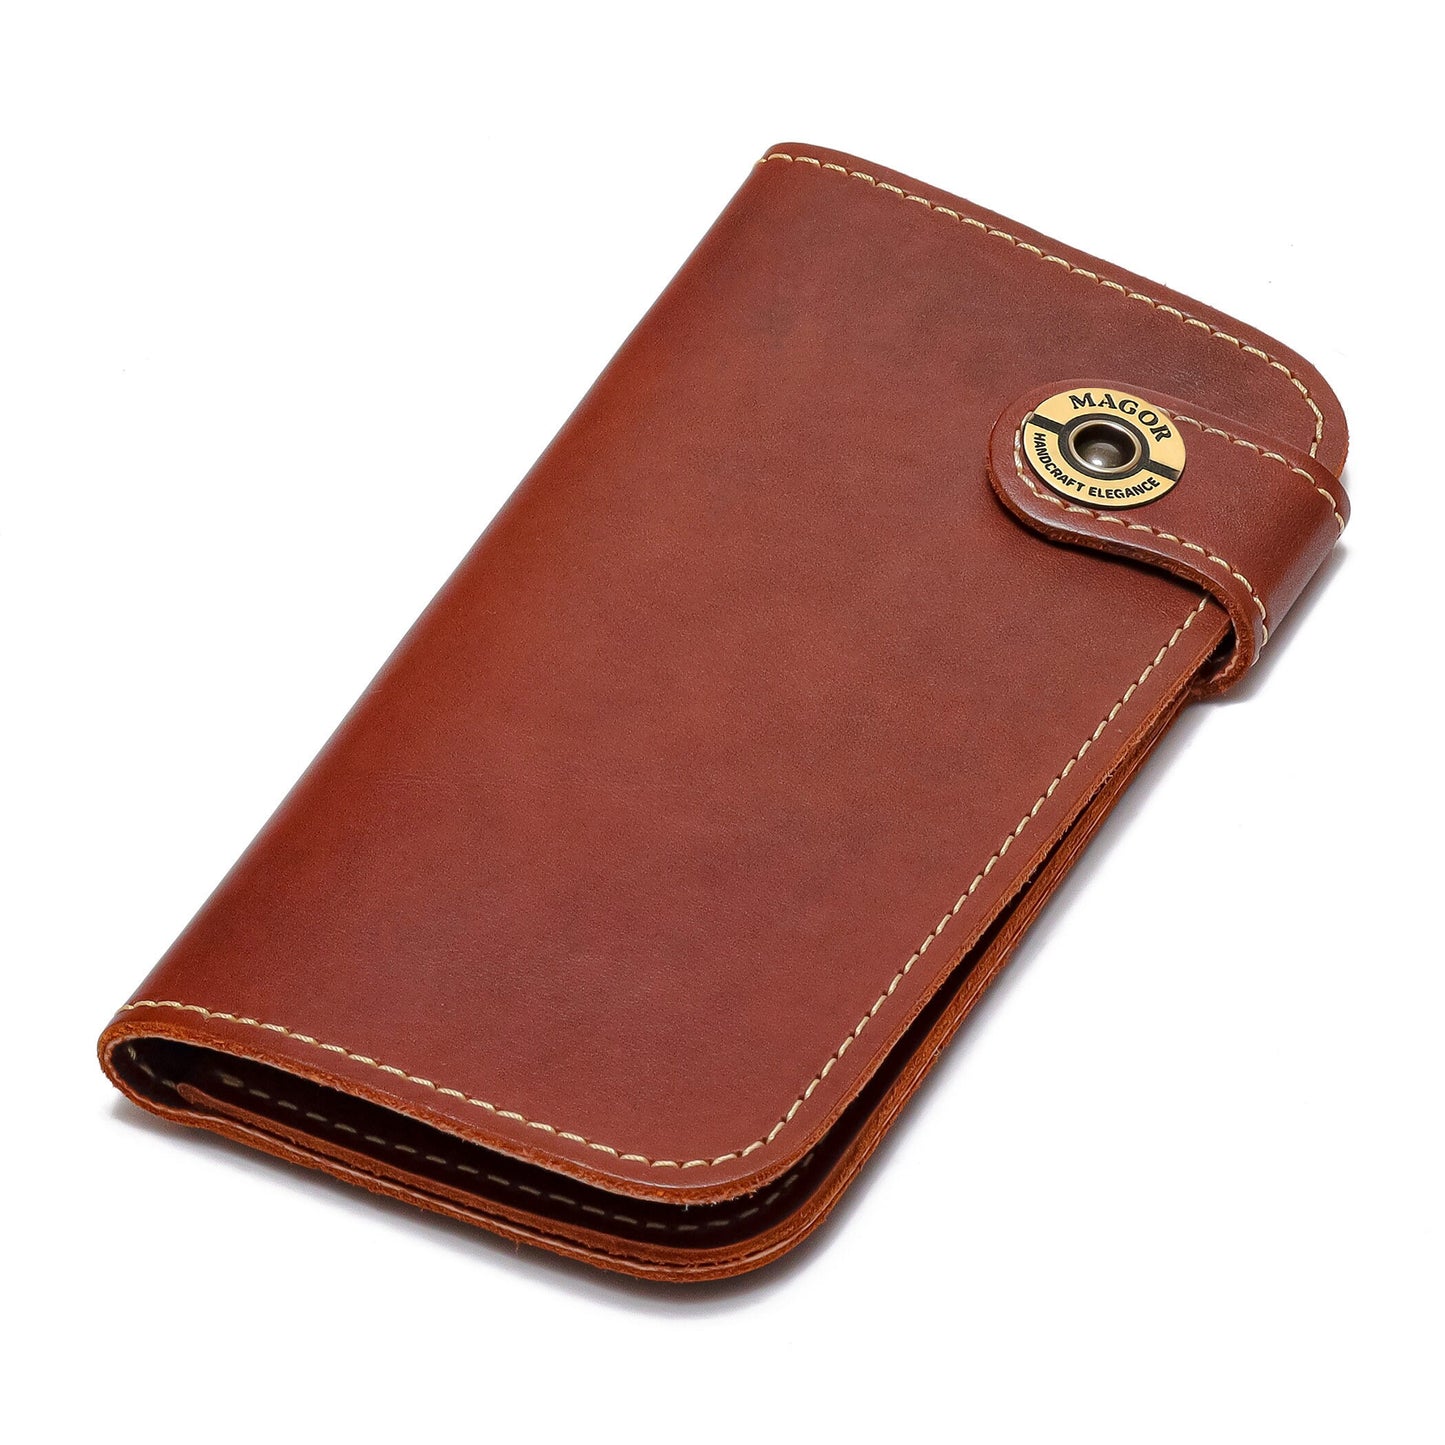 leather wallet | Long Leather Wallet With Card Holder | Zip Coin Pocket | Genuine Leather Wallet | gift ideas